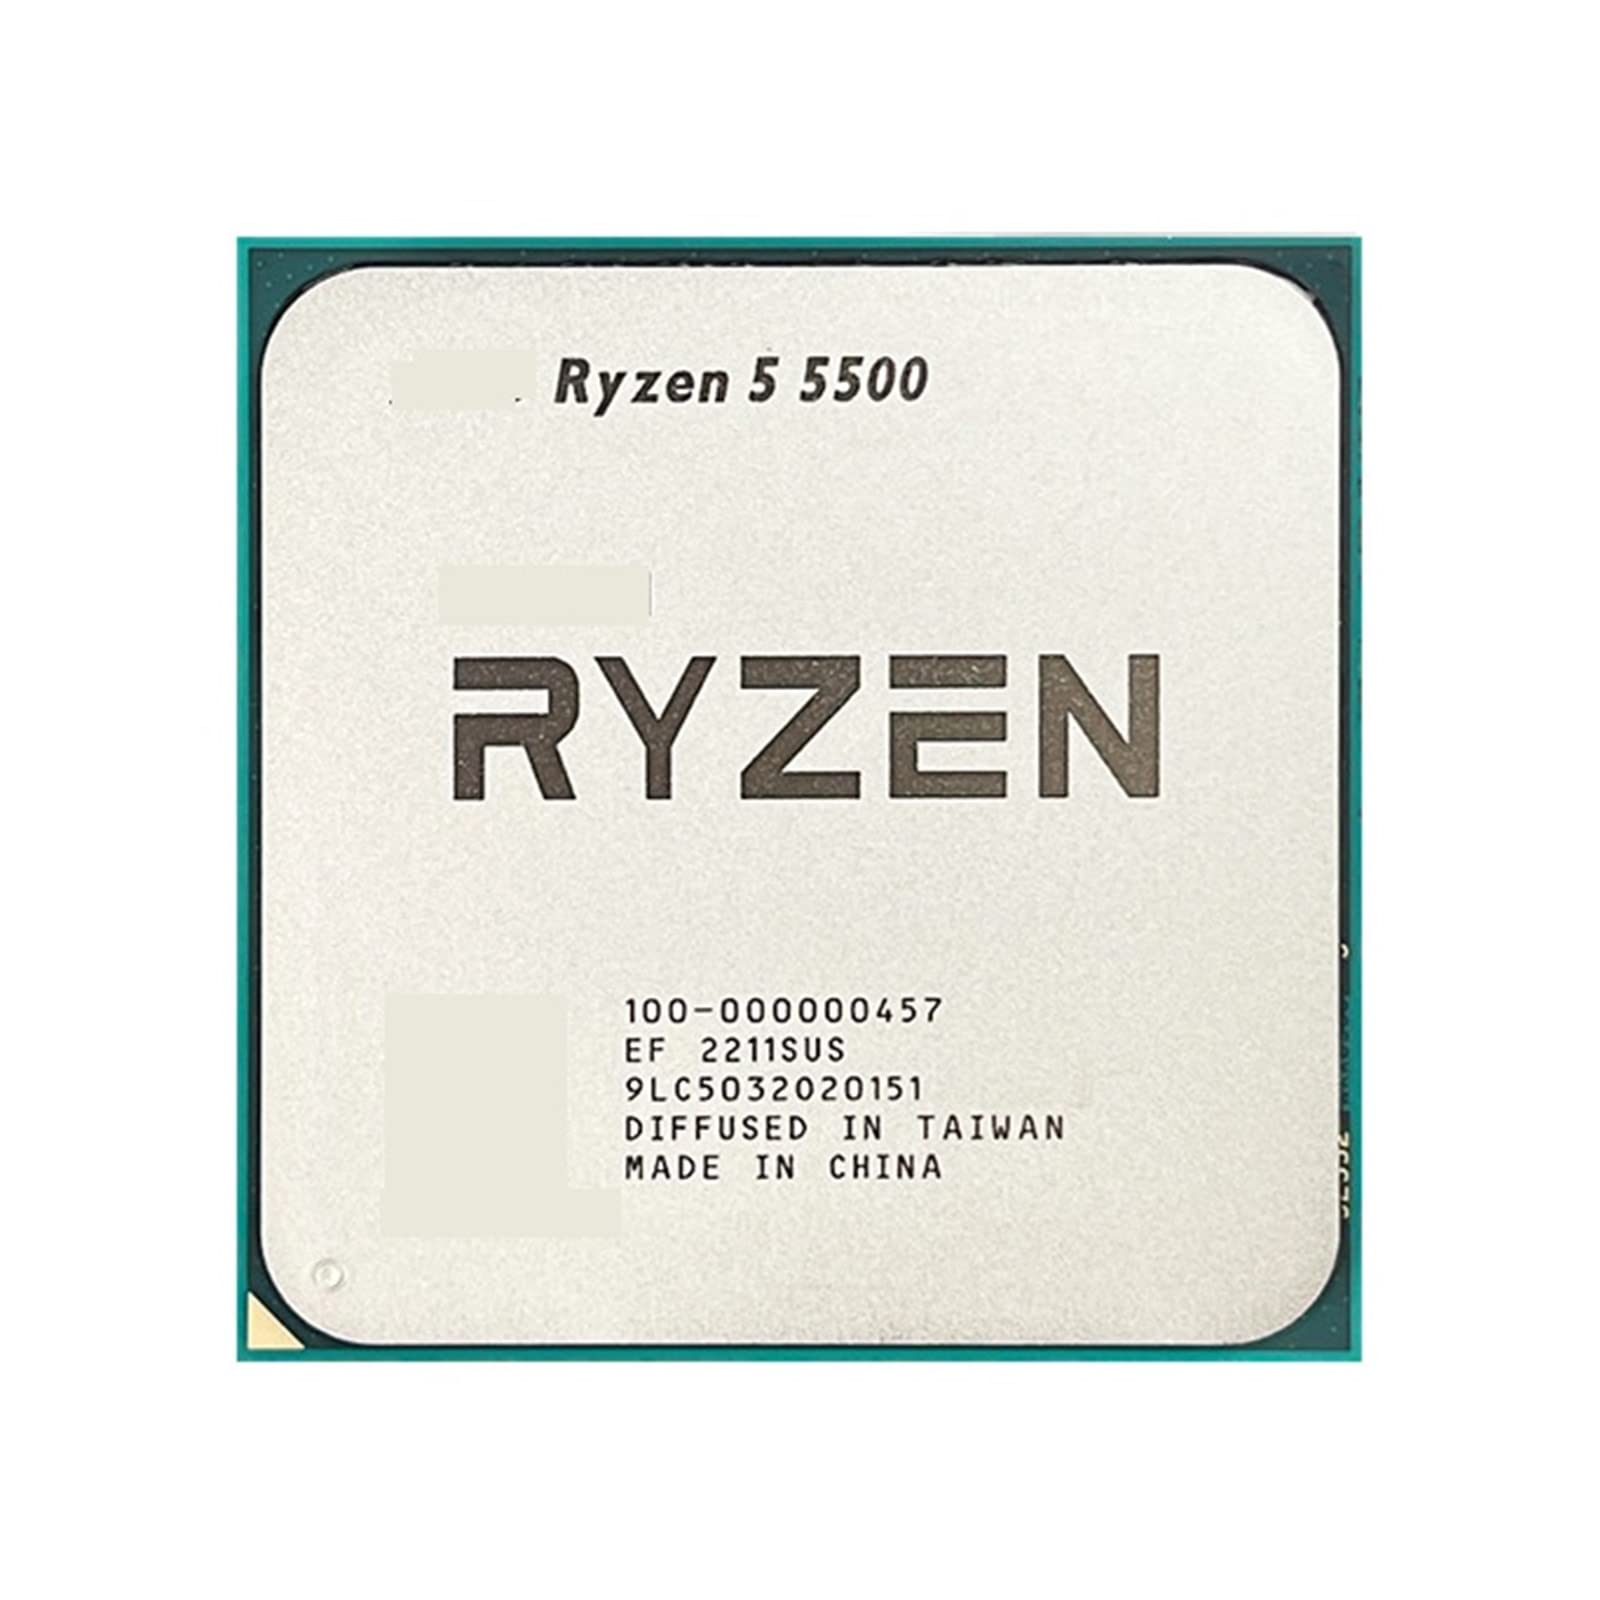 AMD CPU Ryzen 5 5500 Tray Pack [3.60~4.20 GHz, 6 Cores, 12 Threads, L2 3MB, 16MB L3 Cache, 3Mb L2 Cache, 7nm, Zen 3, AM4, Support DDR4]